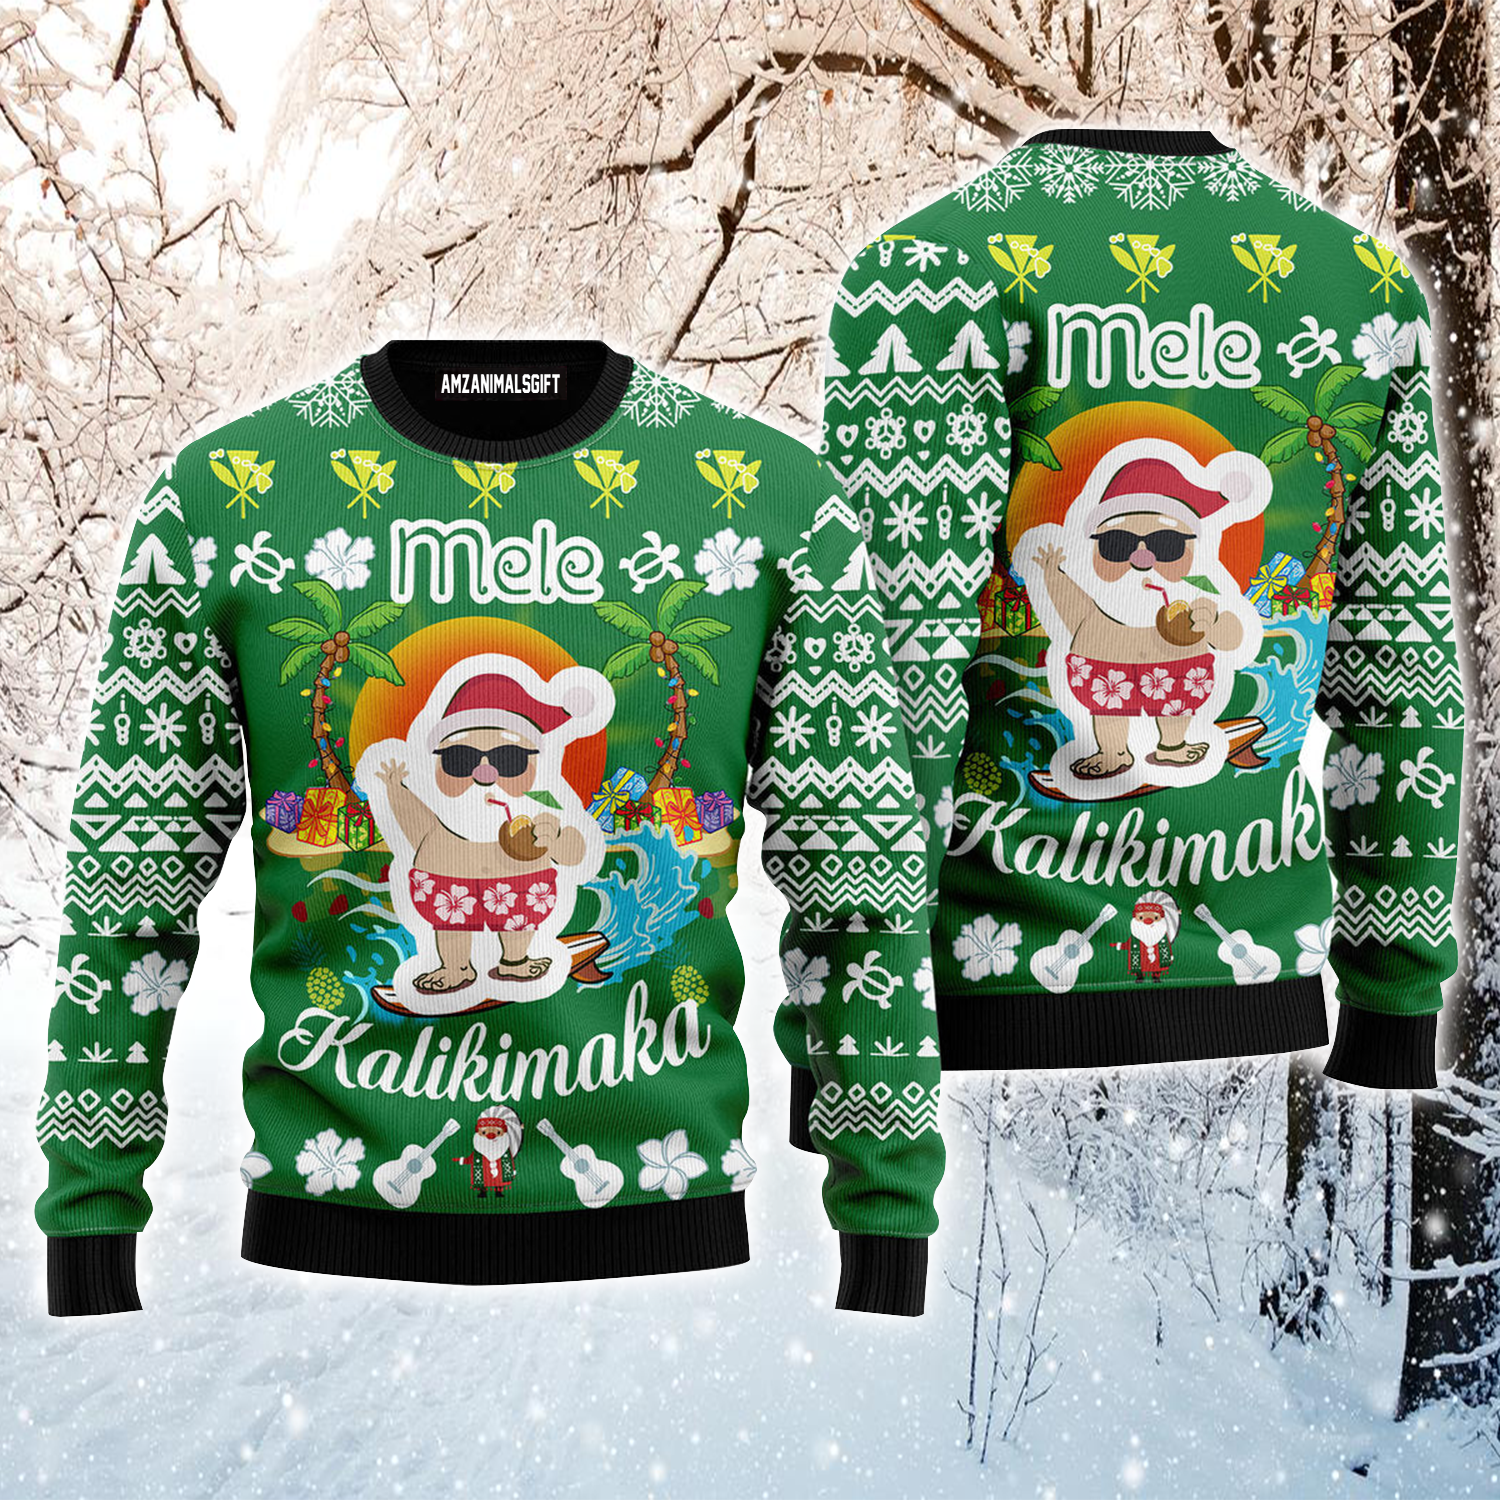 Santa Clause Christmas Ugly Sweater, Mele Kalikimaka Ugly Sweater, Funny Santa Green Sweater For Men & Women, Perfect Gift For Christmas, Friends, Family